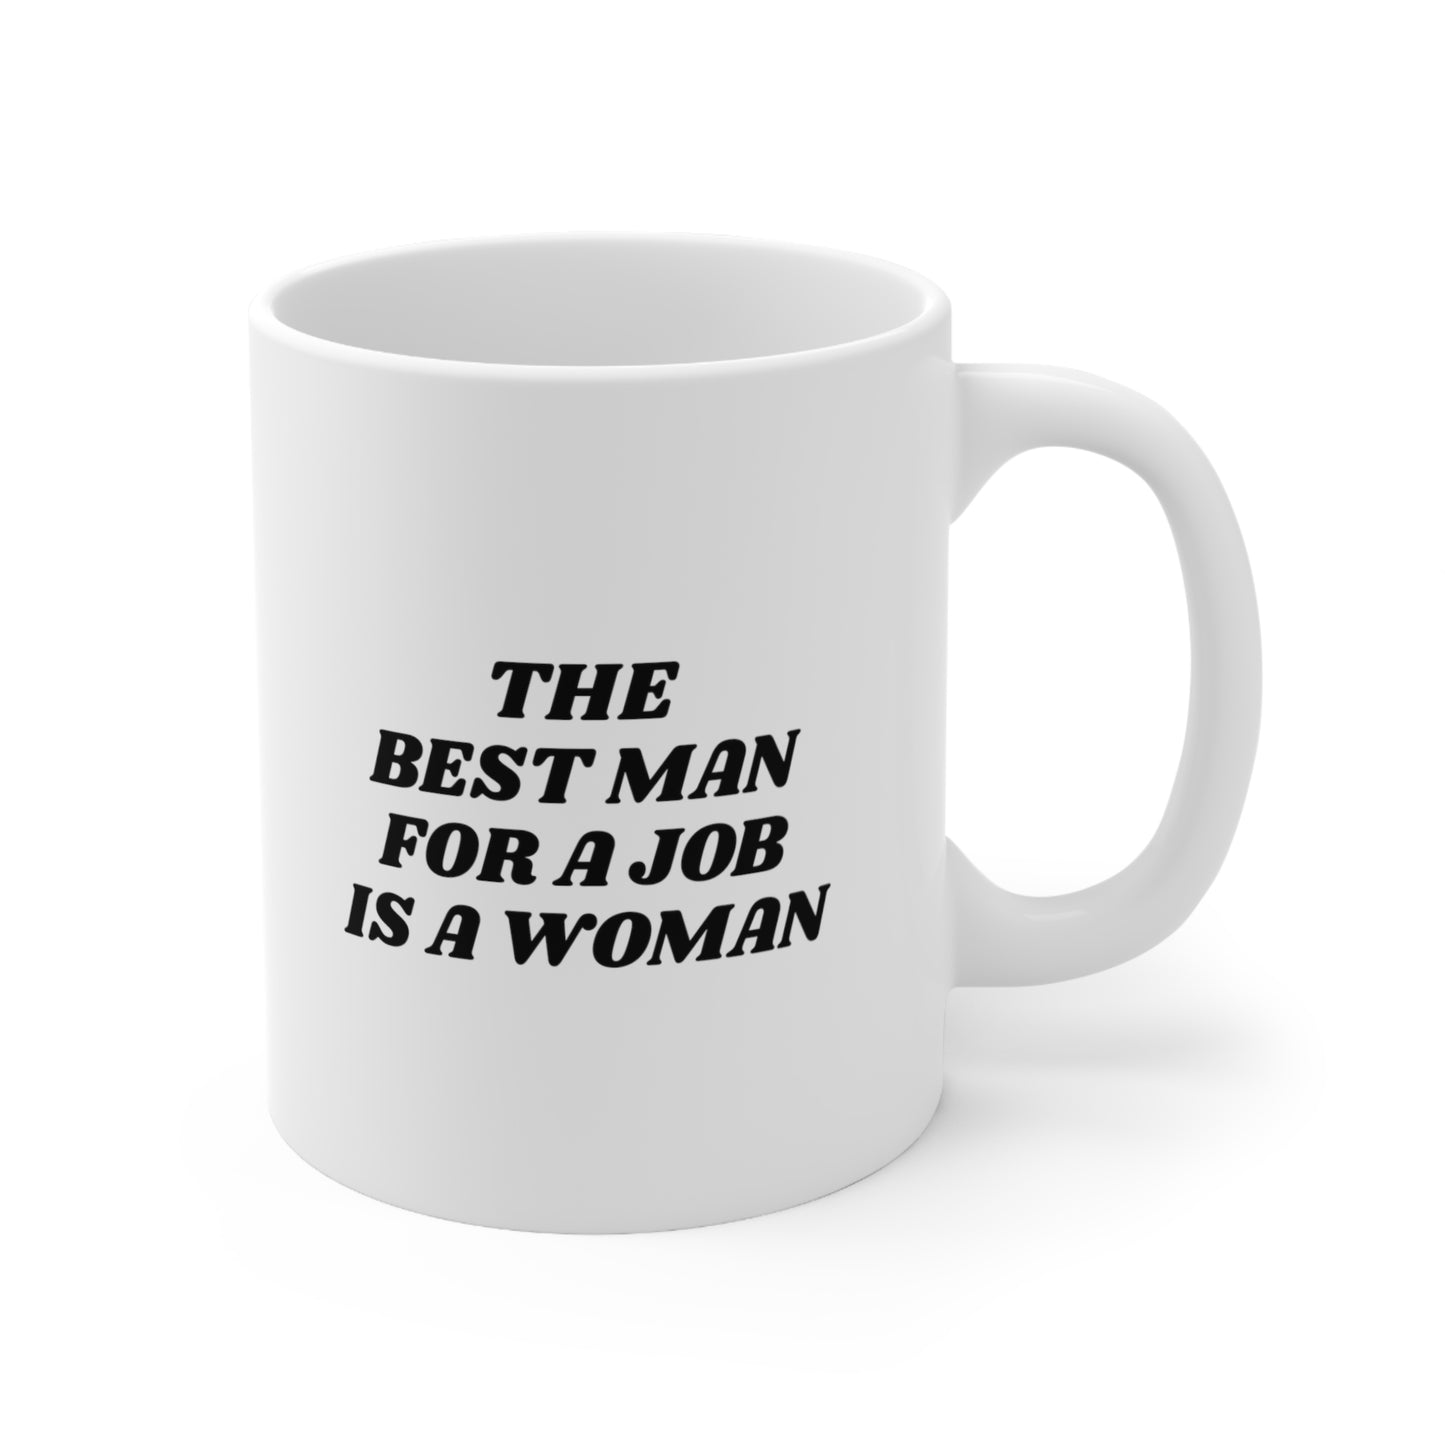 The Best Man For a Job is a Woman Coffee Mug 11oz